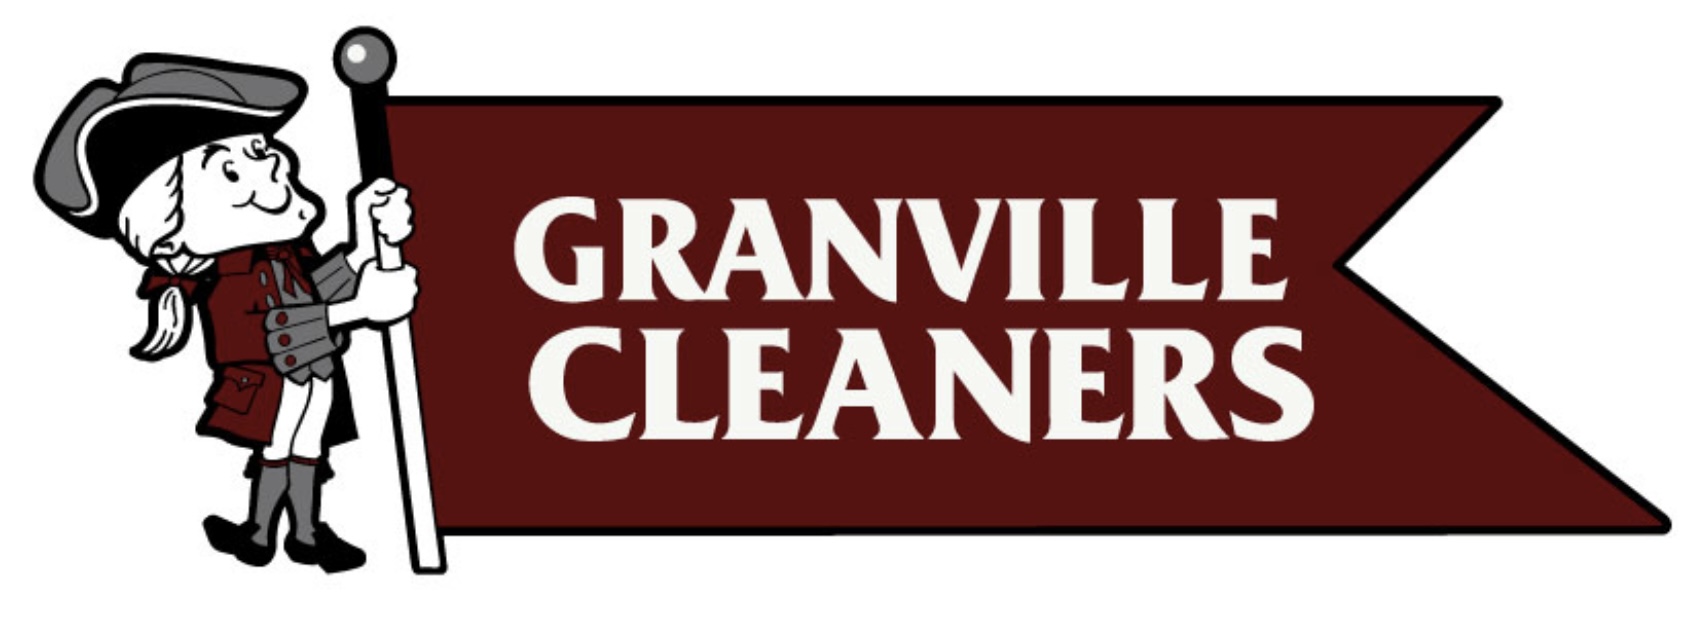 Granville Cleaners